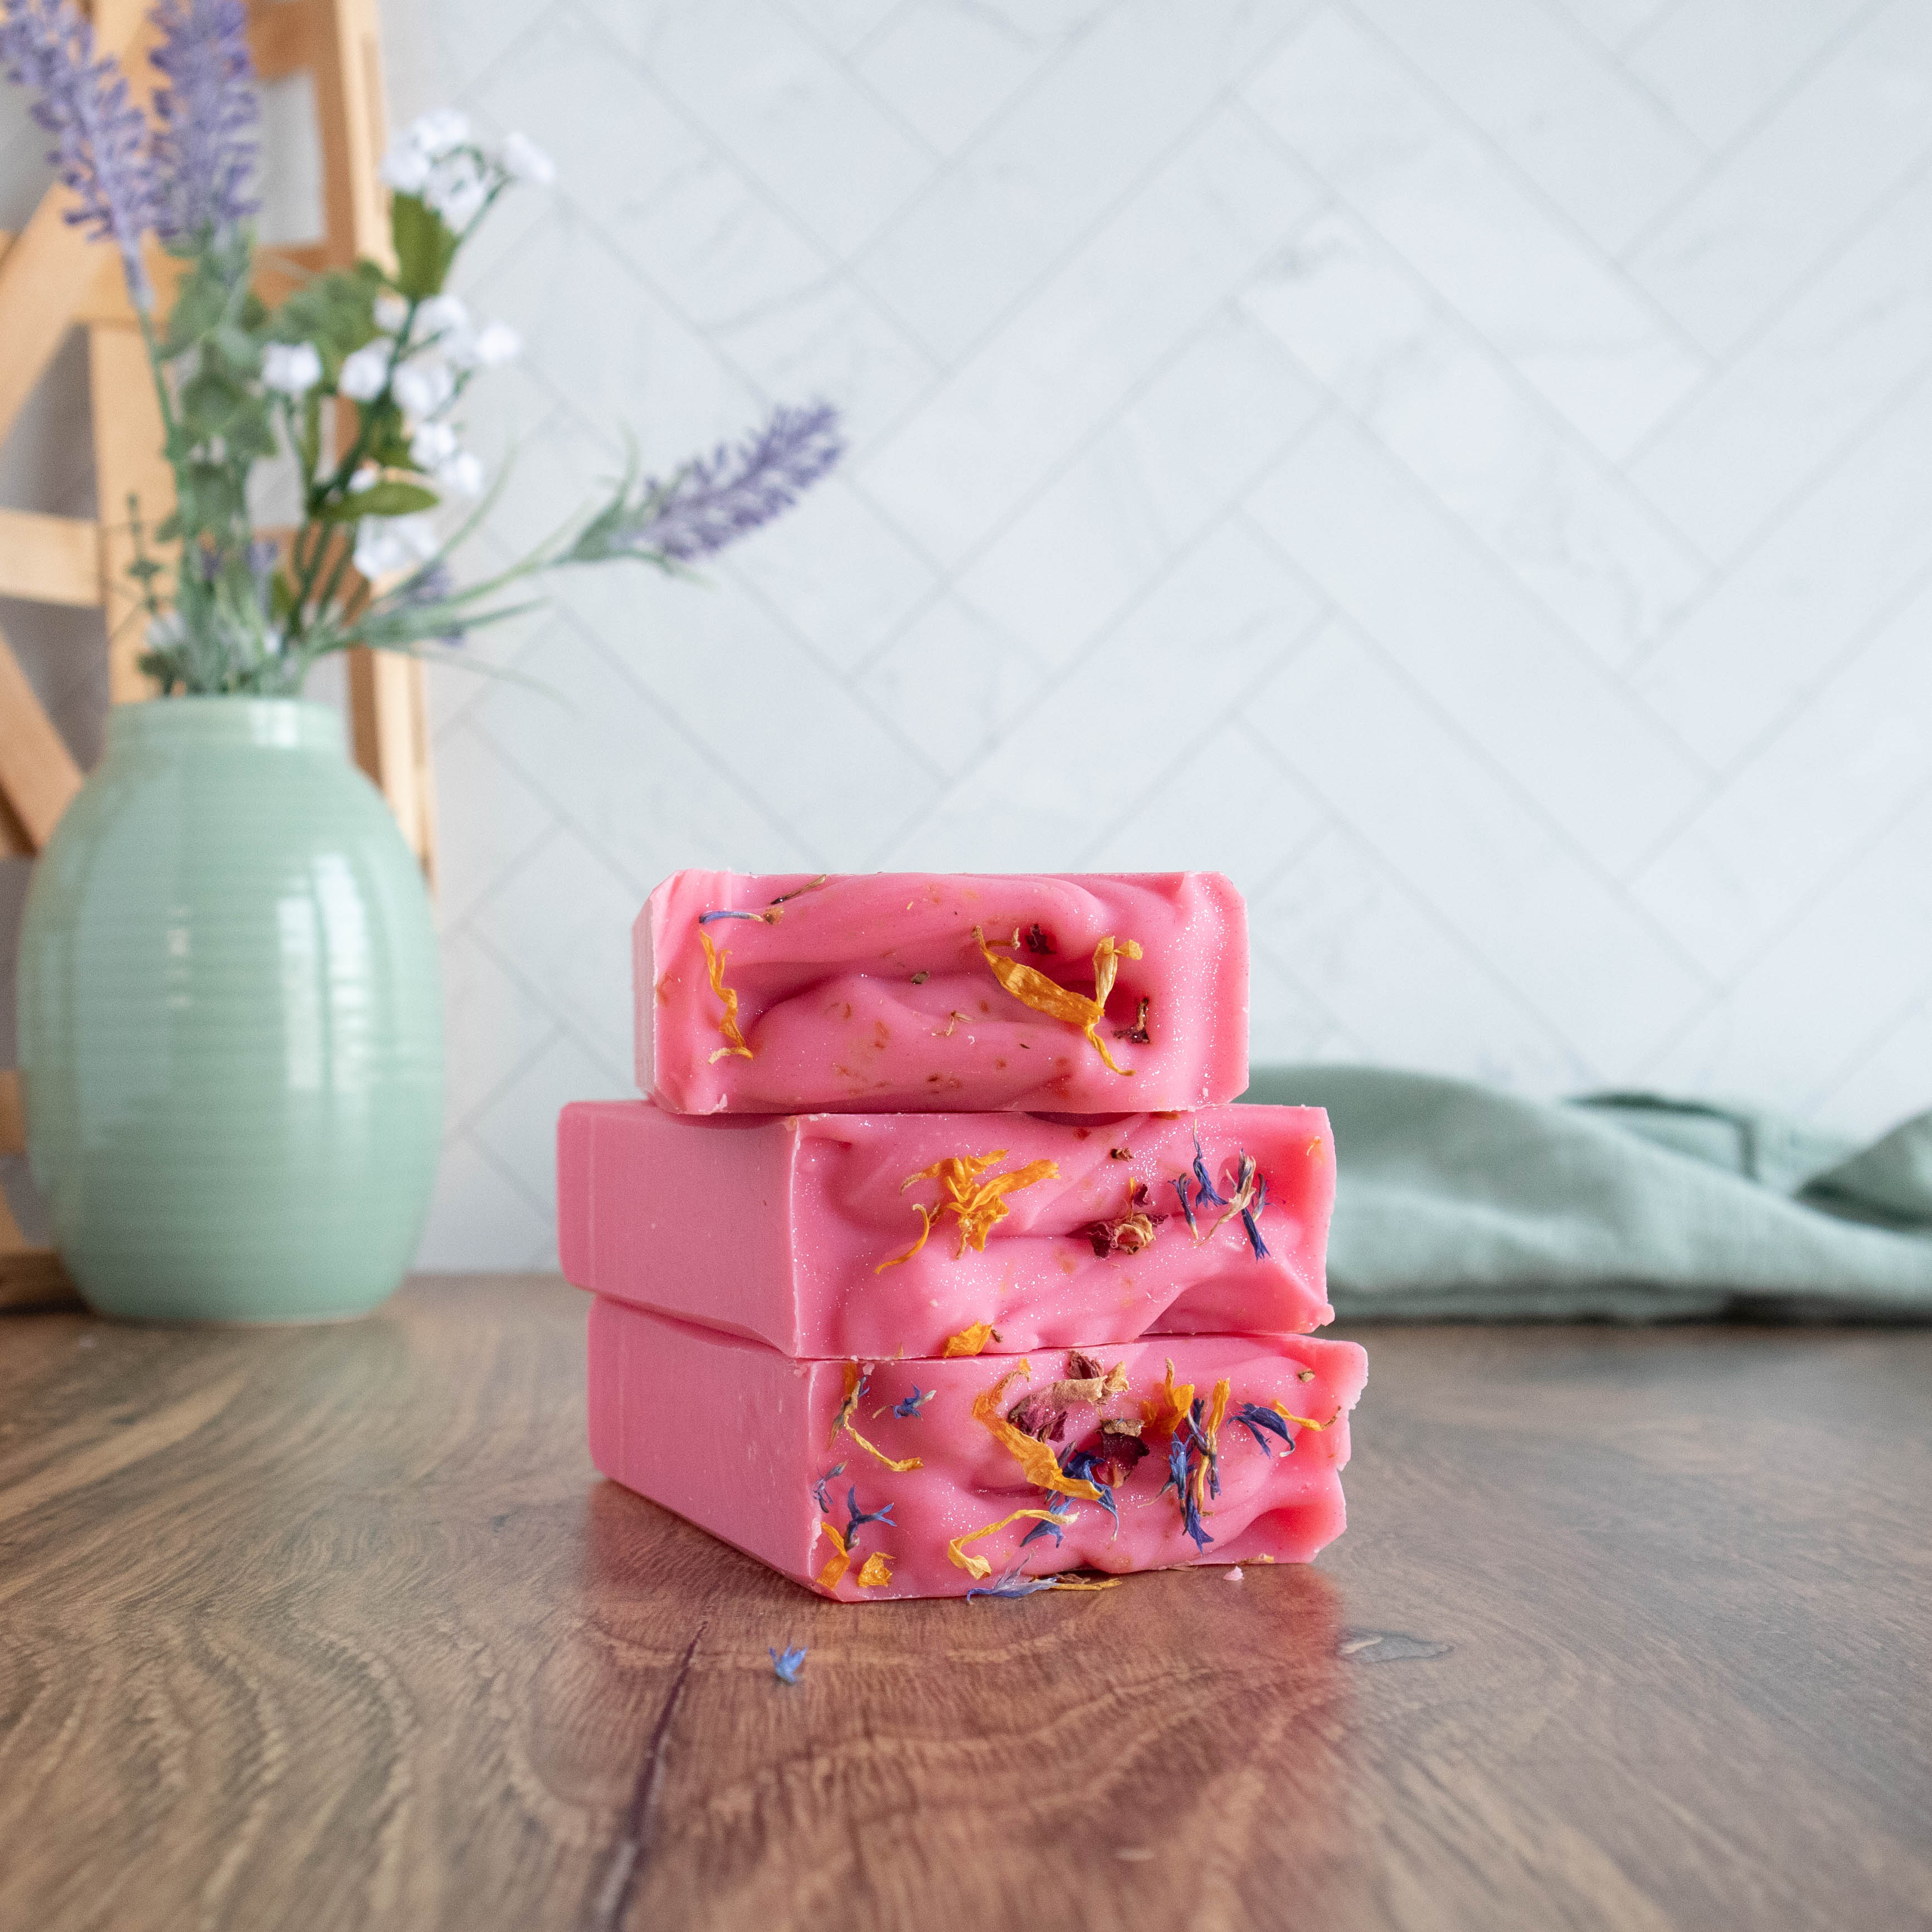 3 very pretty pink soaps stacked on top of each other with the tops facing, showing the sprinkling of blue and yellow flower petals that are adorning the tops. there is a green vase in the background and a green towel running in the back as well